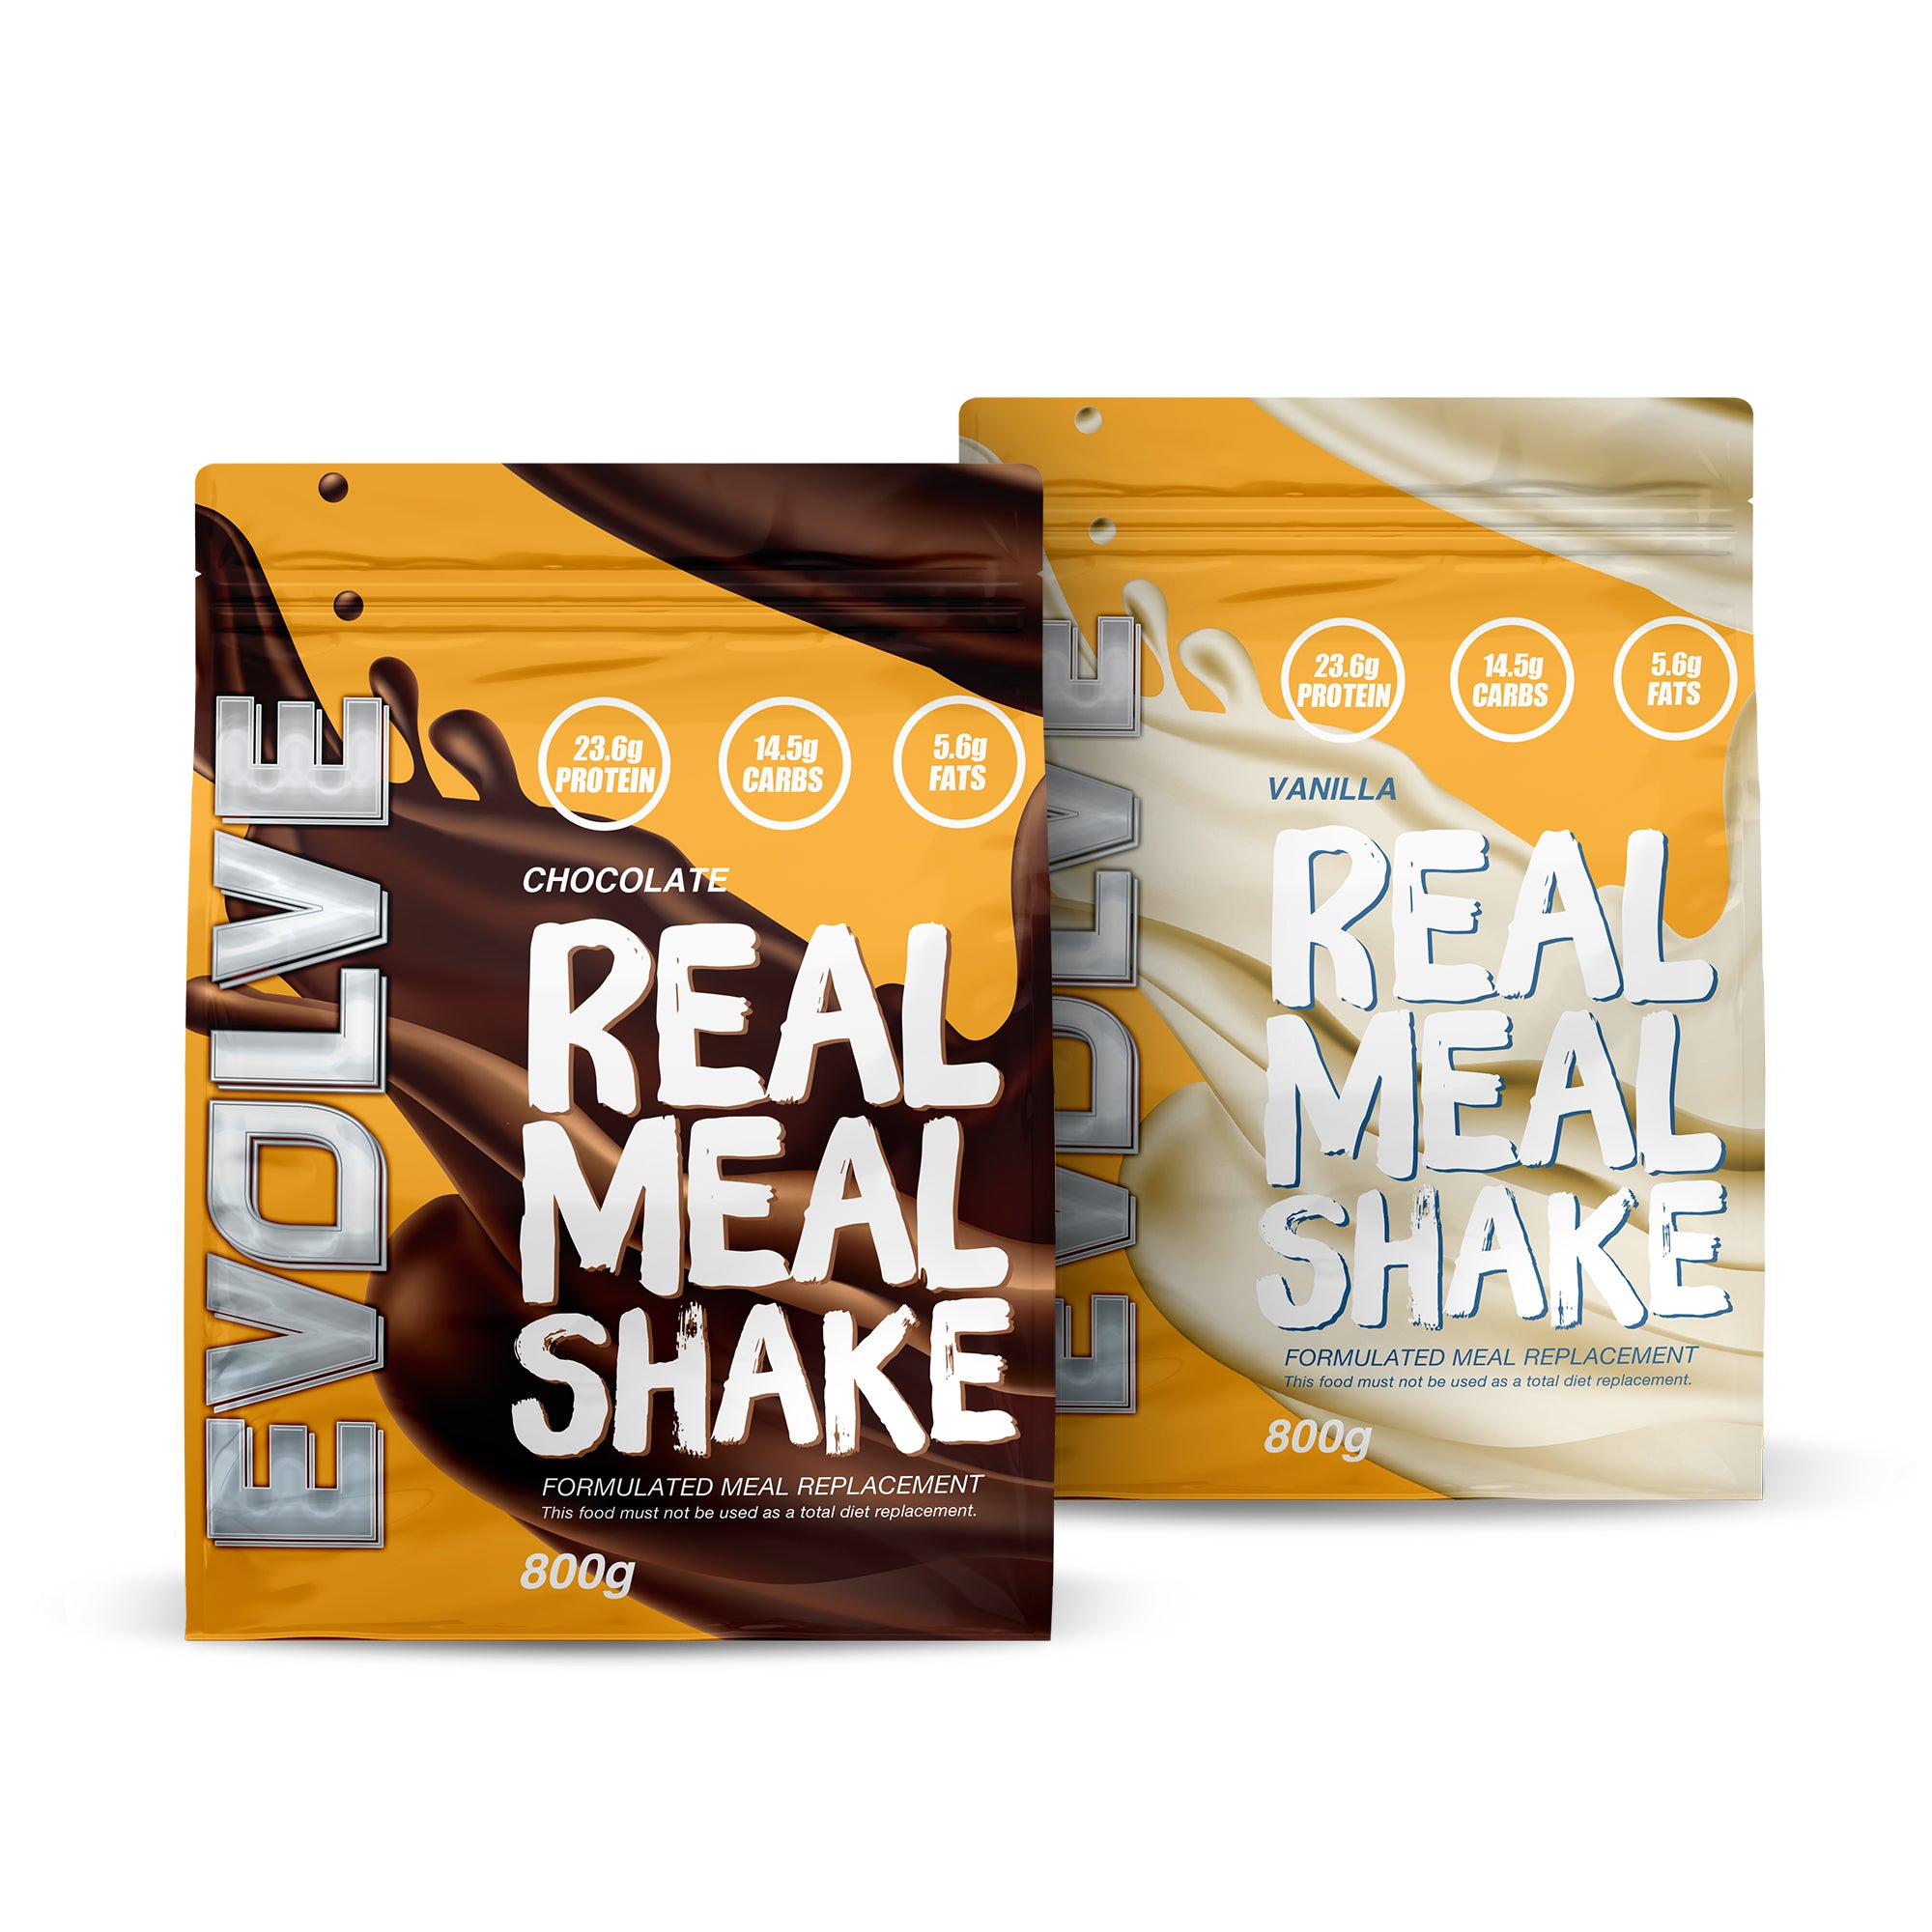 Evolve Nutrition meal replacement shake in Chocolate and Vanilla. 